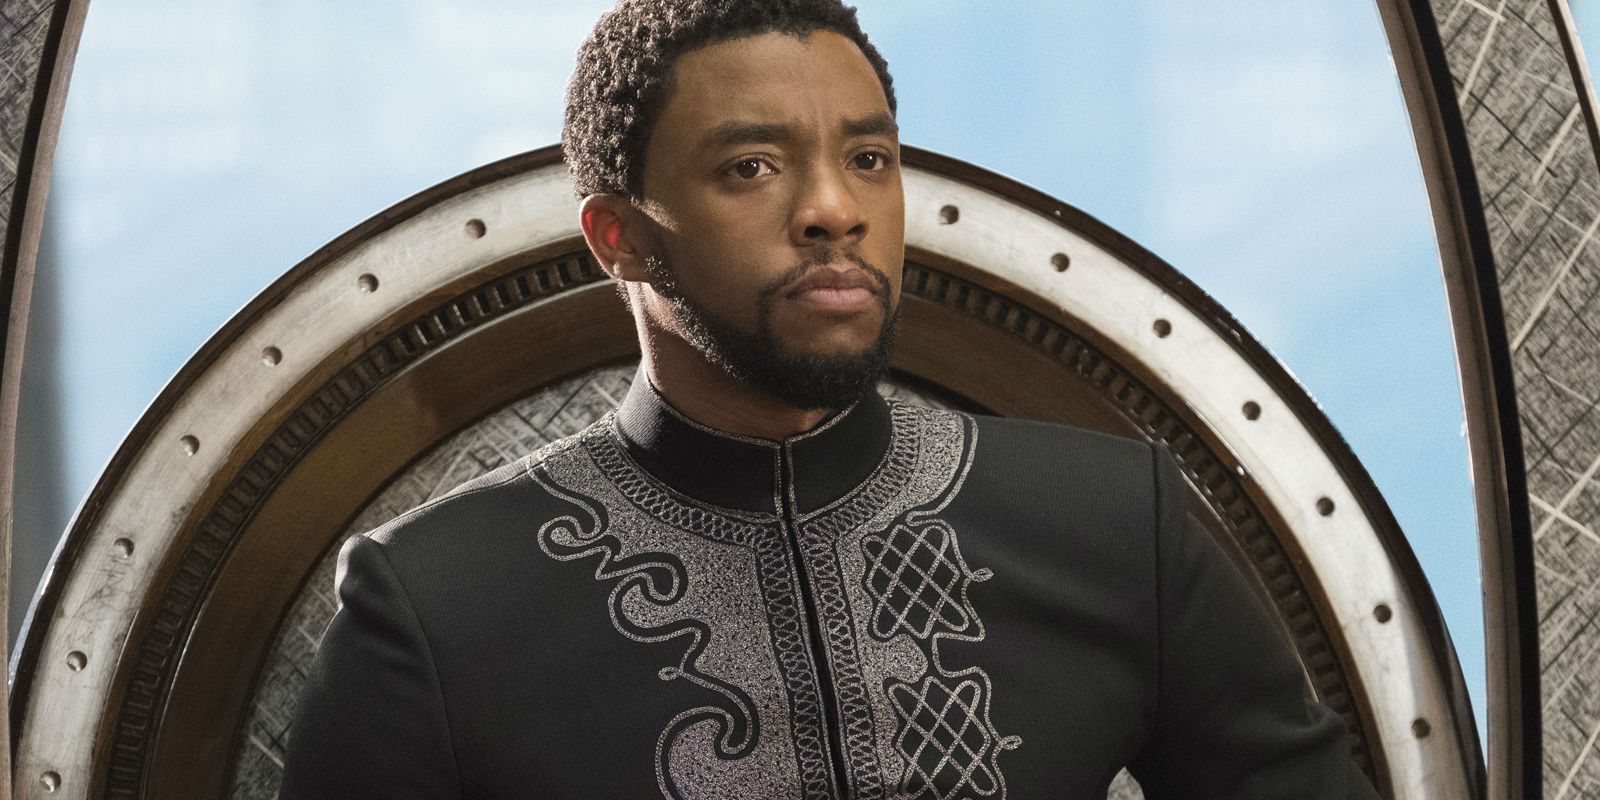 King T'Challa sitting on his throne in Black Panther.